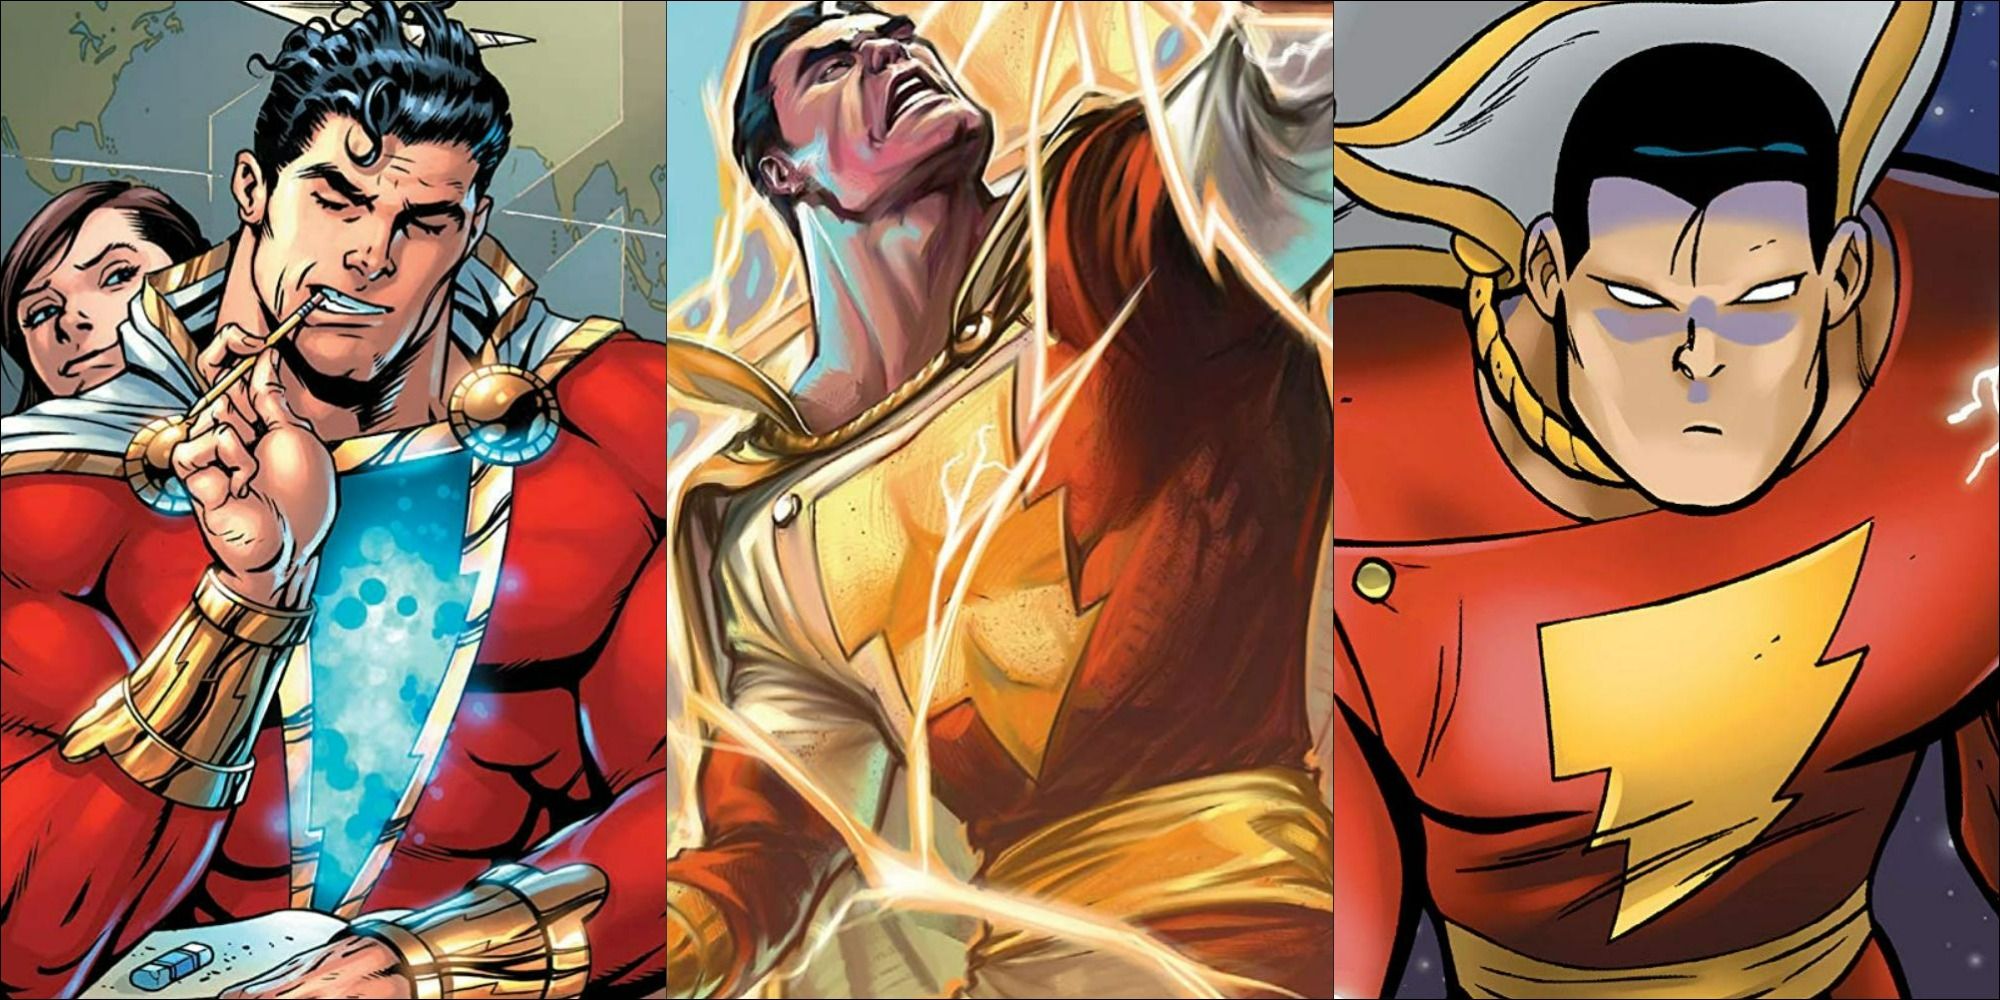 Three pictures of Shazam from the comics